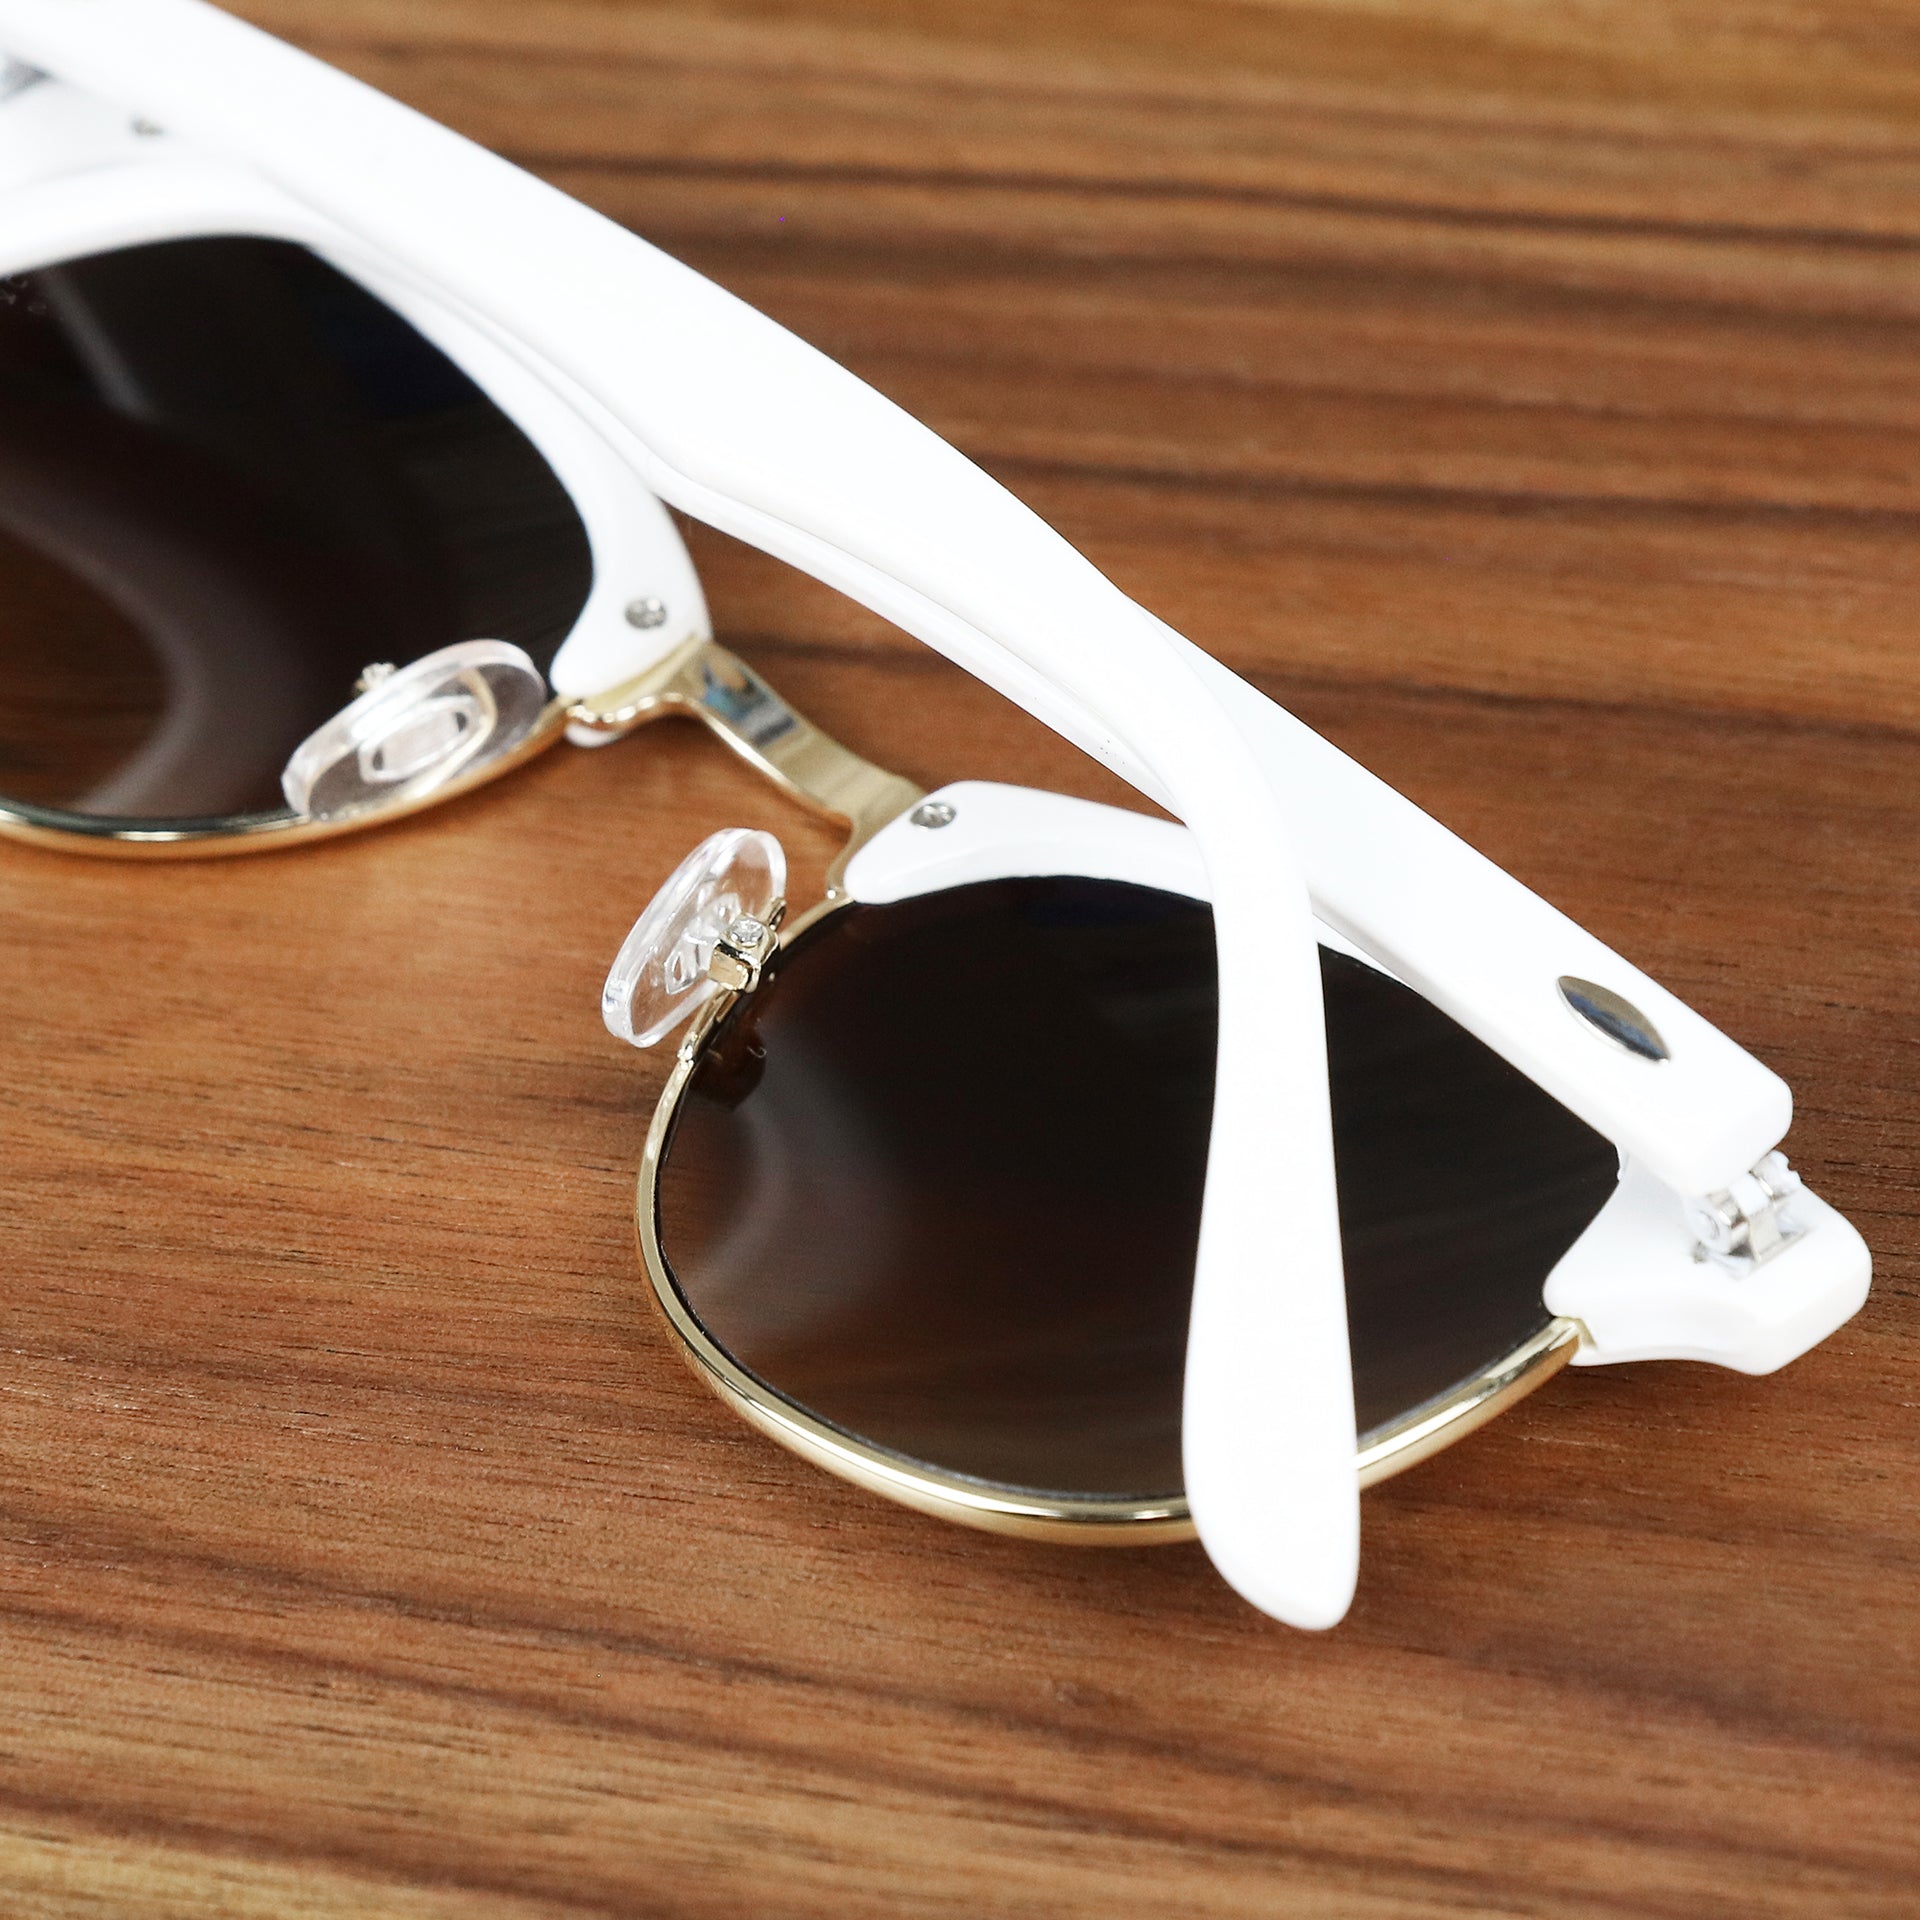 The Round Frame Brown Gradient Lens Sunglasses with White Gold Frame folded up